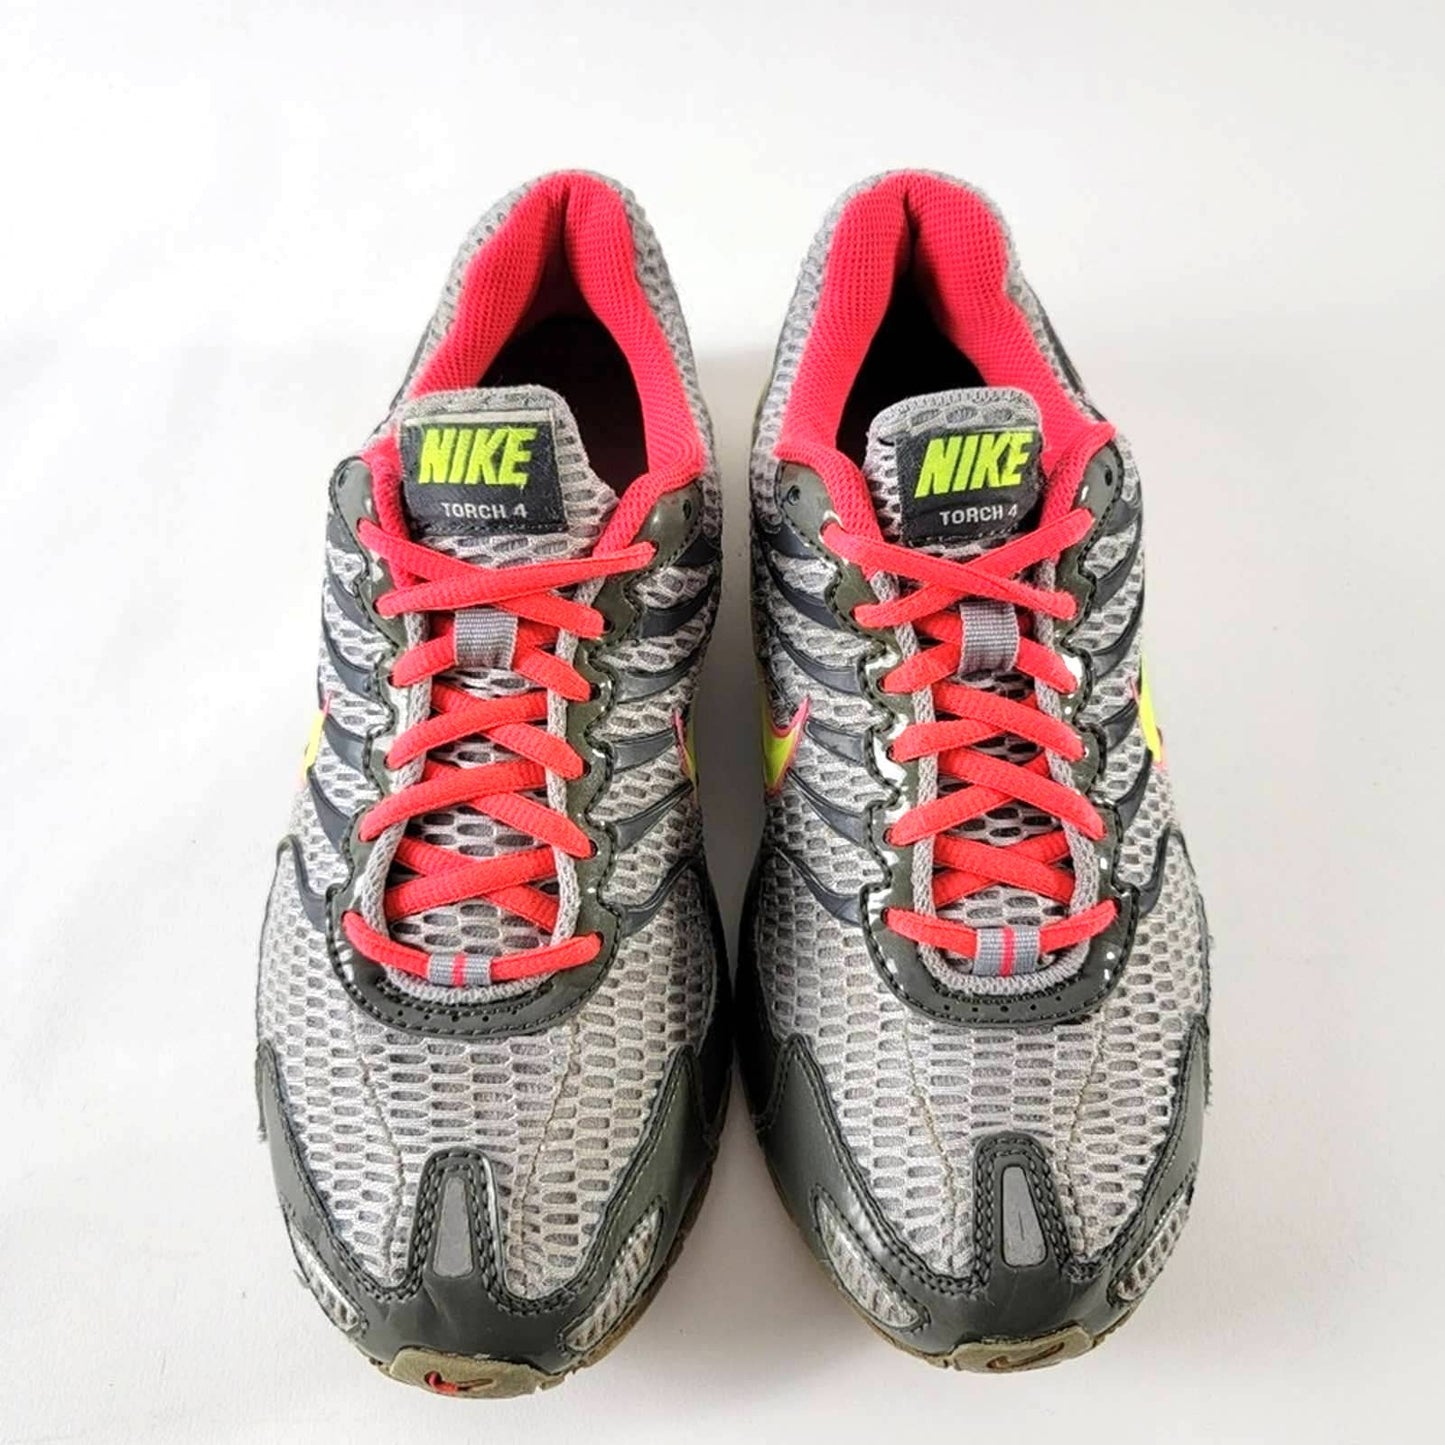 Nike Air Max Torch 4 Gray Volt Punch Running Shoes - 9